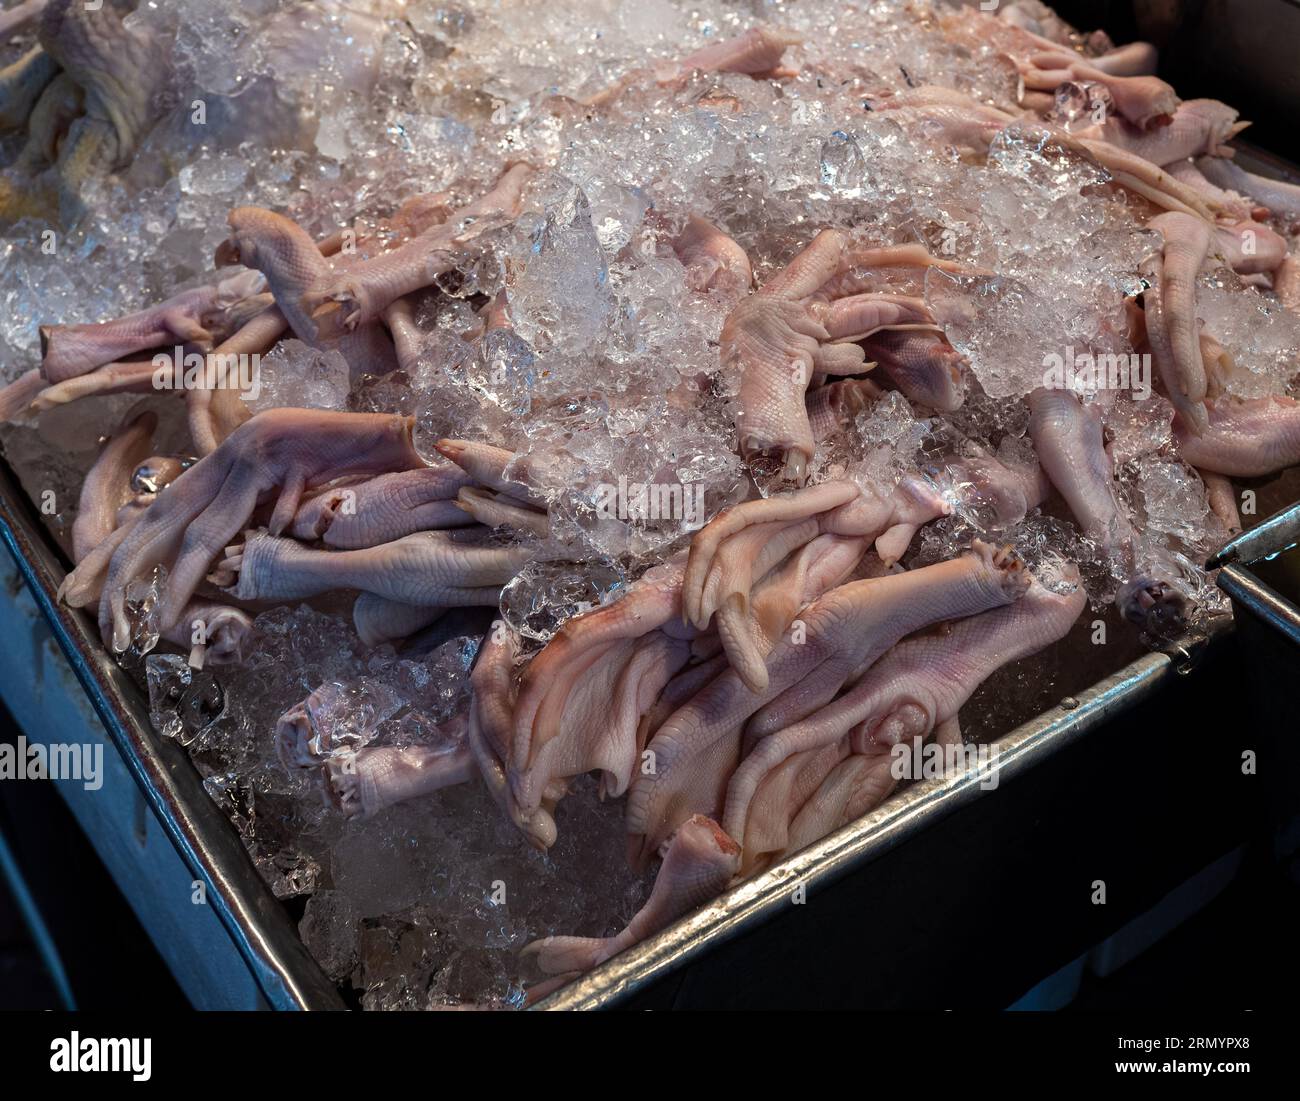 A large crate of delectable chicken feet rests on ice at a vibrant street market in Bangkok, Thailand. Stock Photo